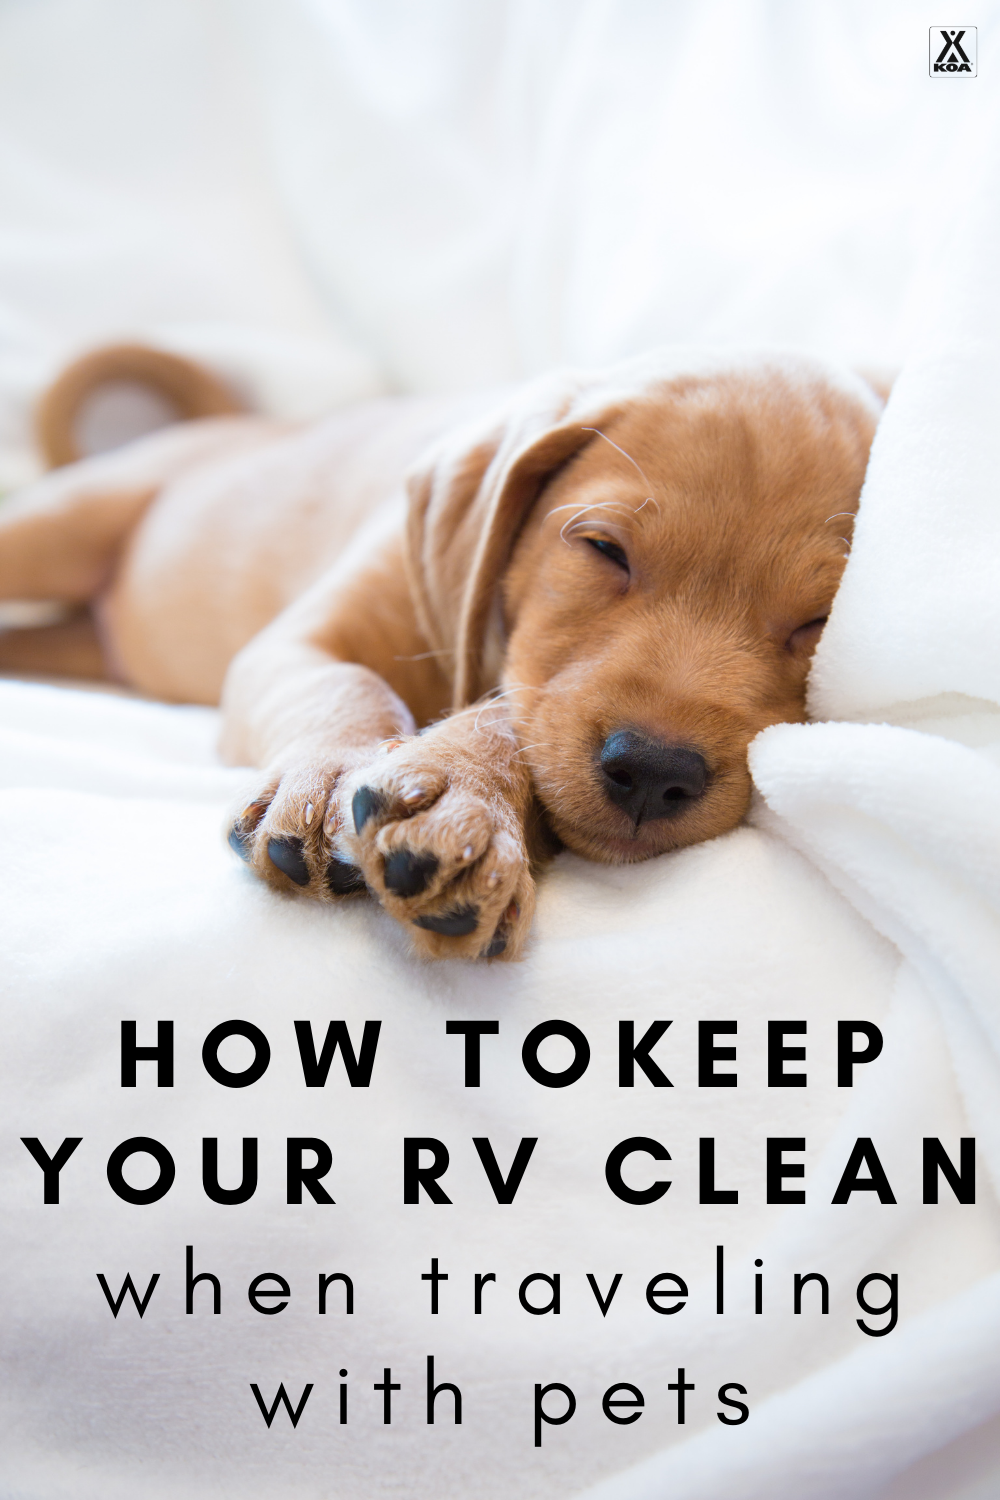 Traveling with pets can be one of the best parts of the RV lifestyle. Cleaning up after them? Not so much. Use our guide to discover tips and tricks to keeping your RV clean when traveling with pets.